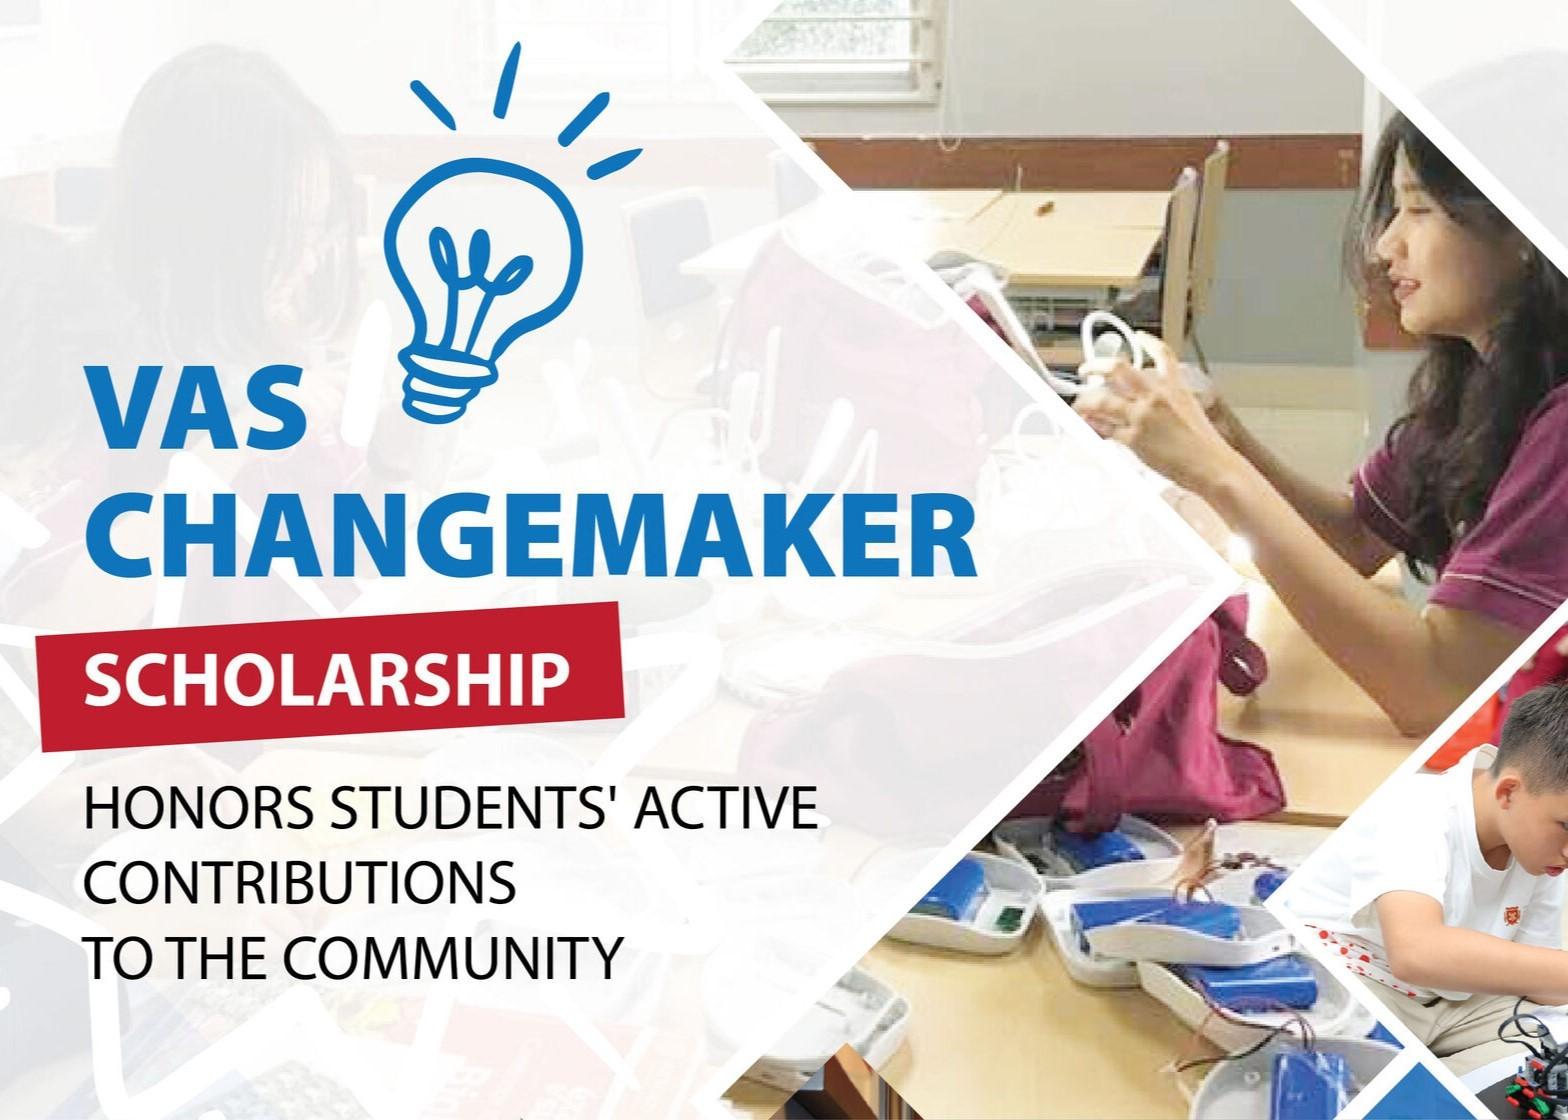 “VAS Changemaker Scholarship” honors students’ positive contributions to the community